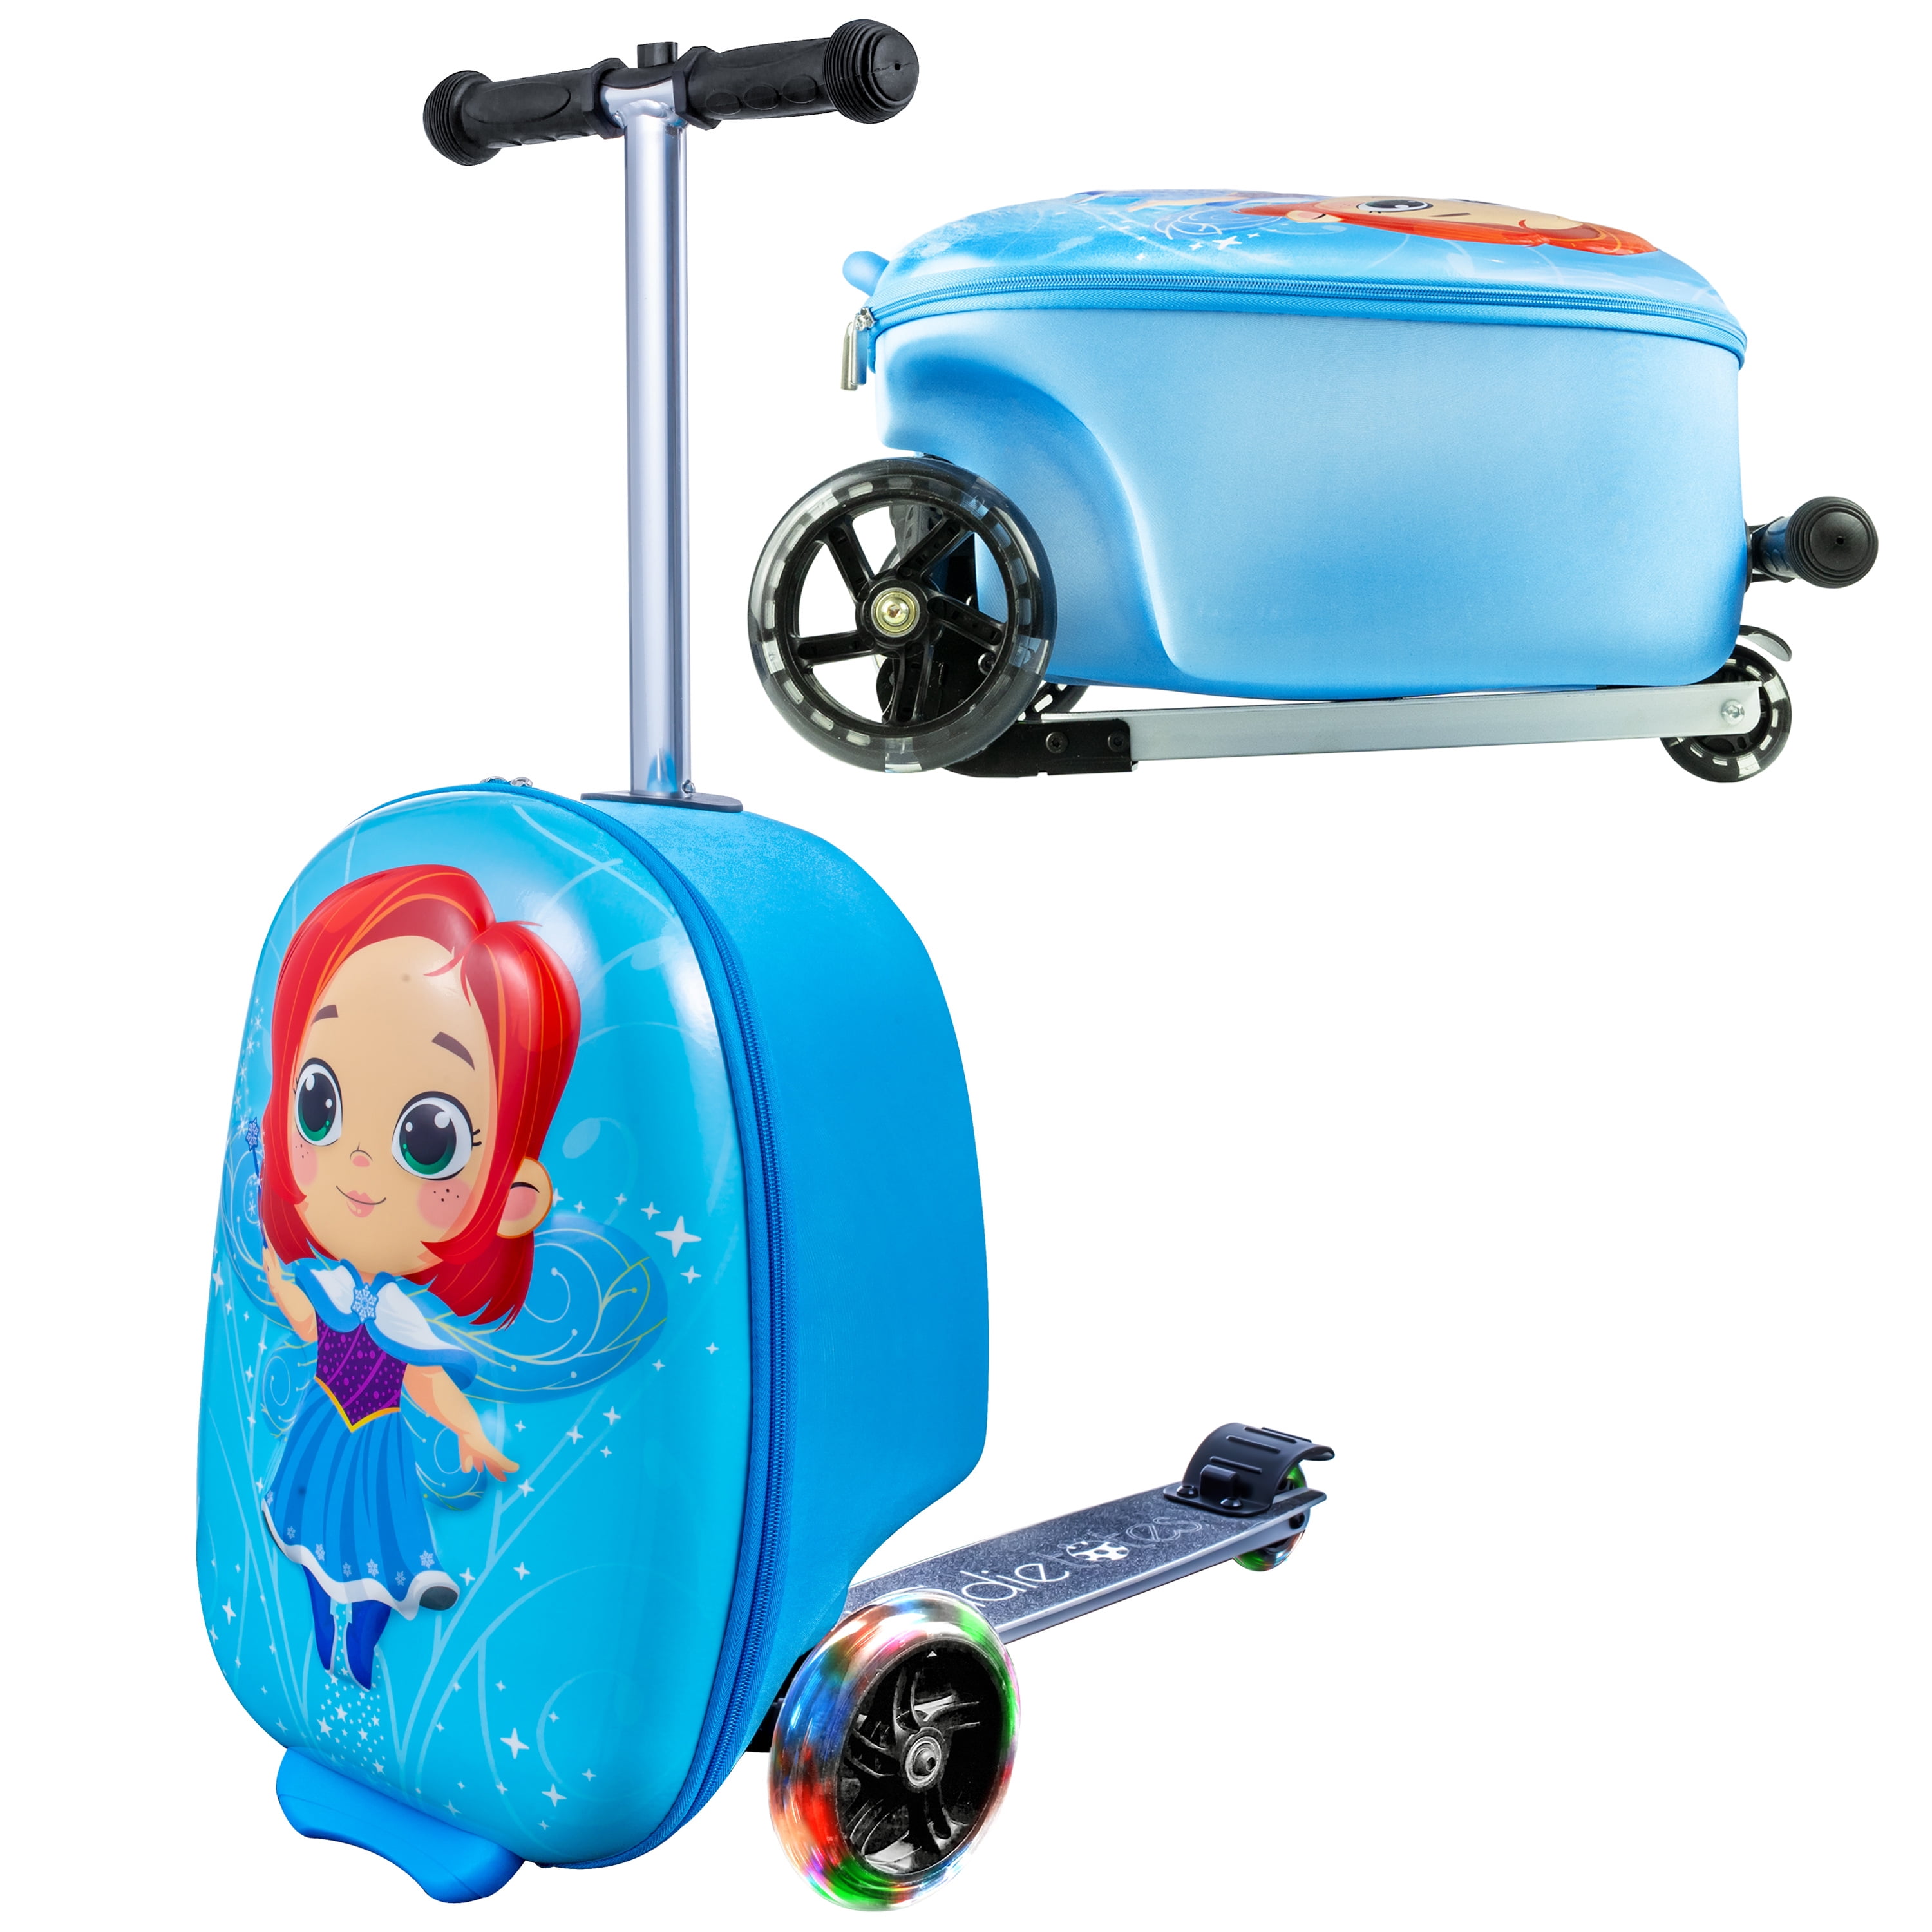 Forkludret glans Rund Kiddietotes Fairy 3D Hard Shell Scooter Ride On Suitcase Luggage for Kids -  Light Up Wheels - 19.5" Hardcase - Walmart.com